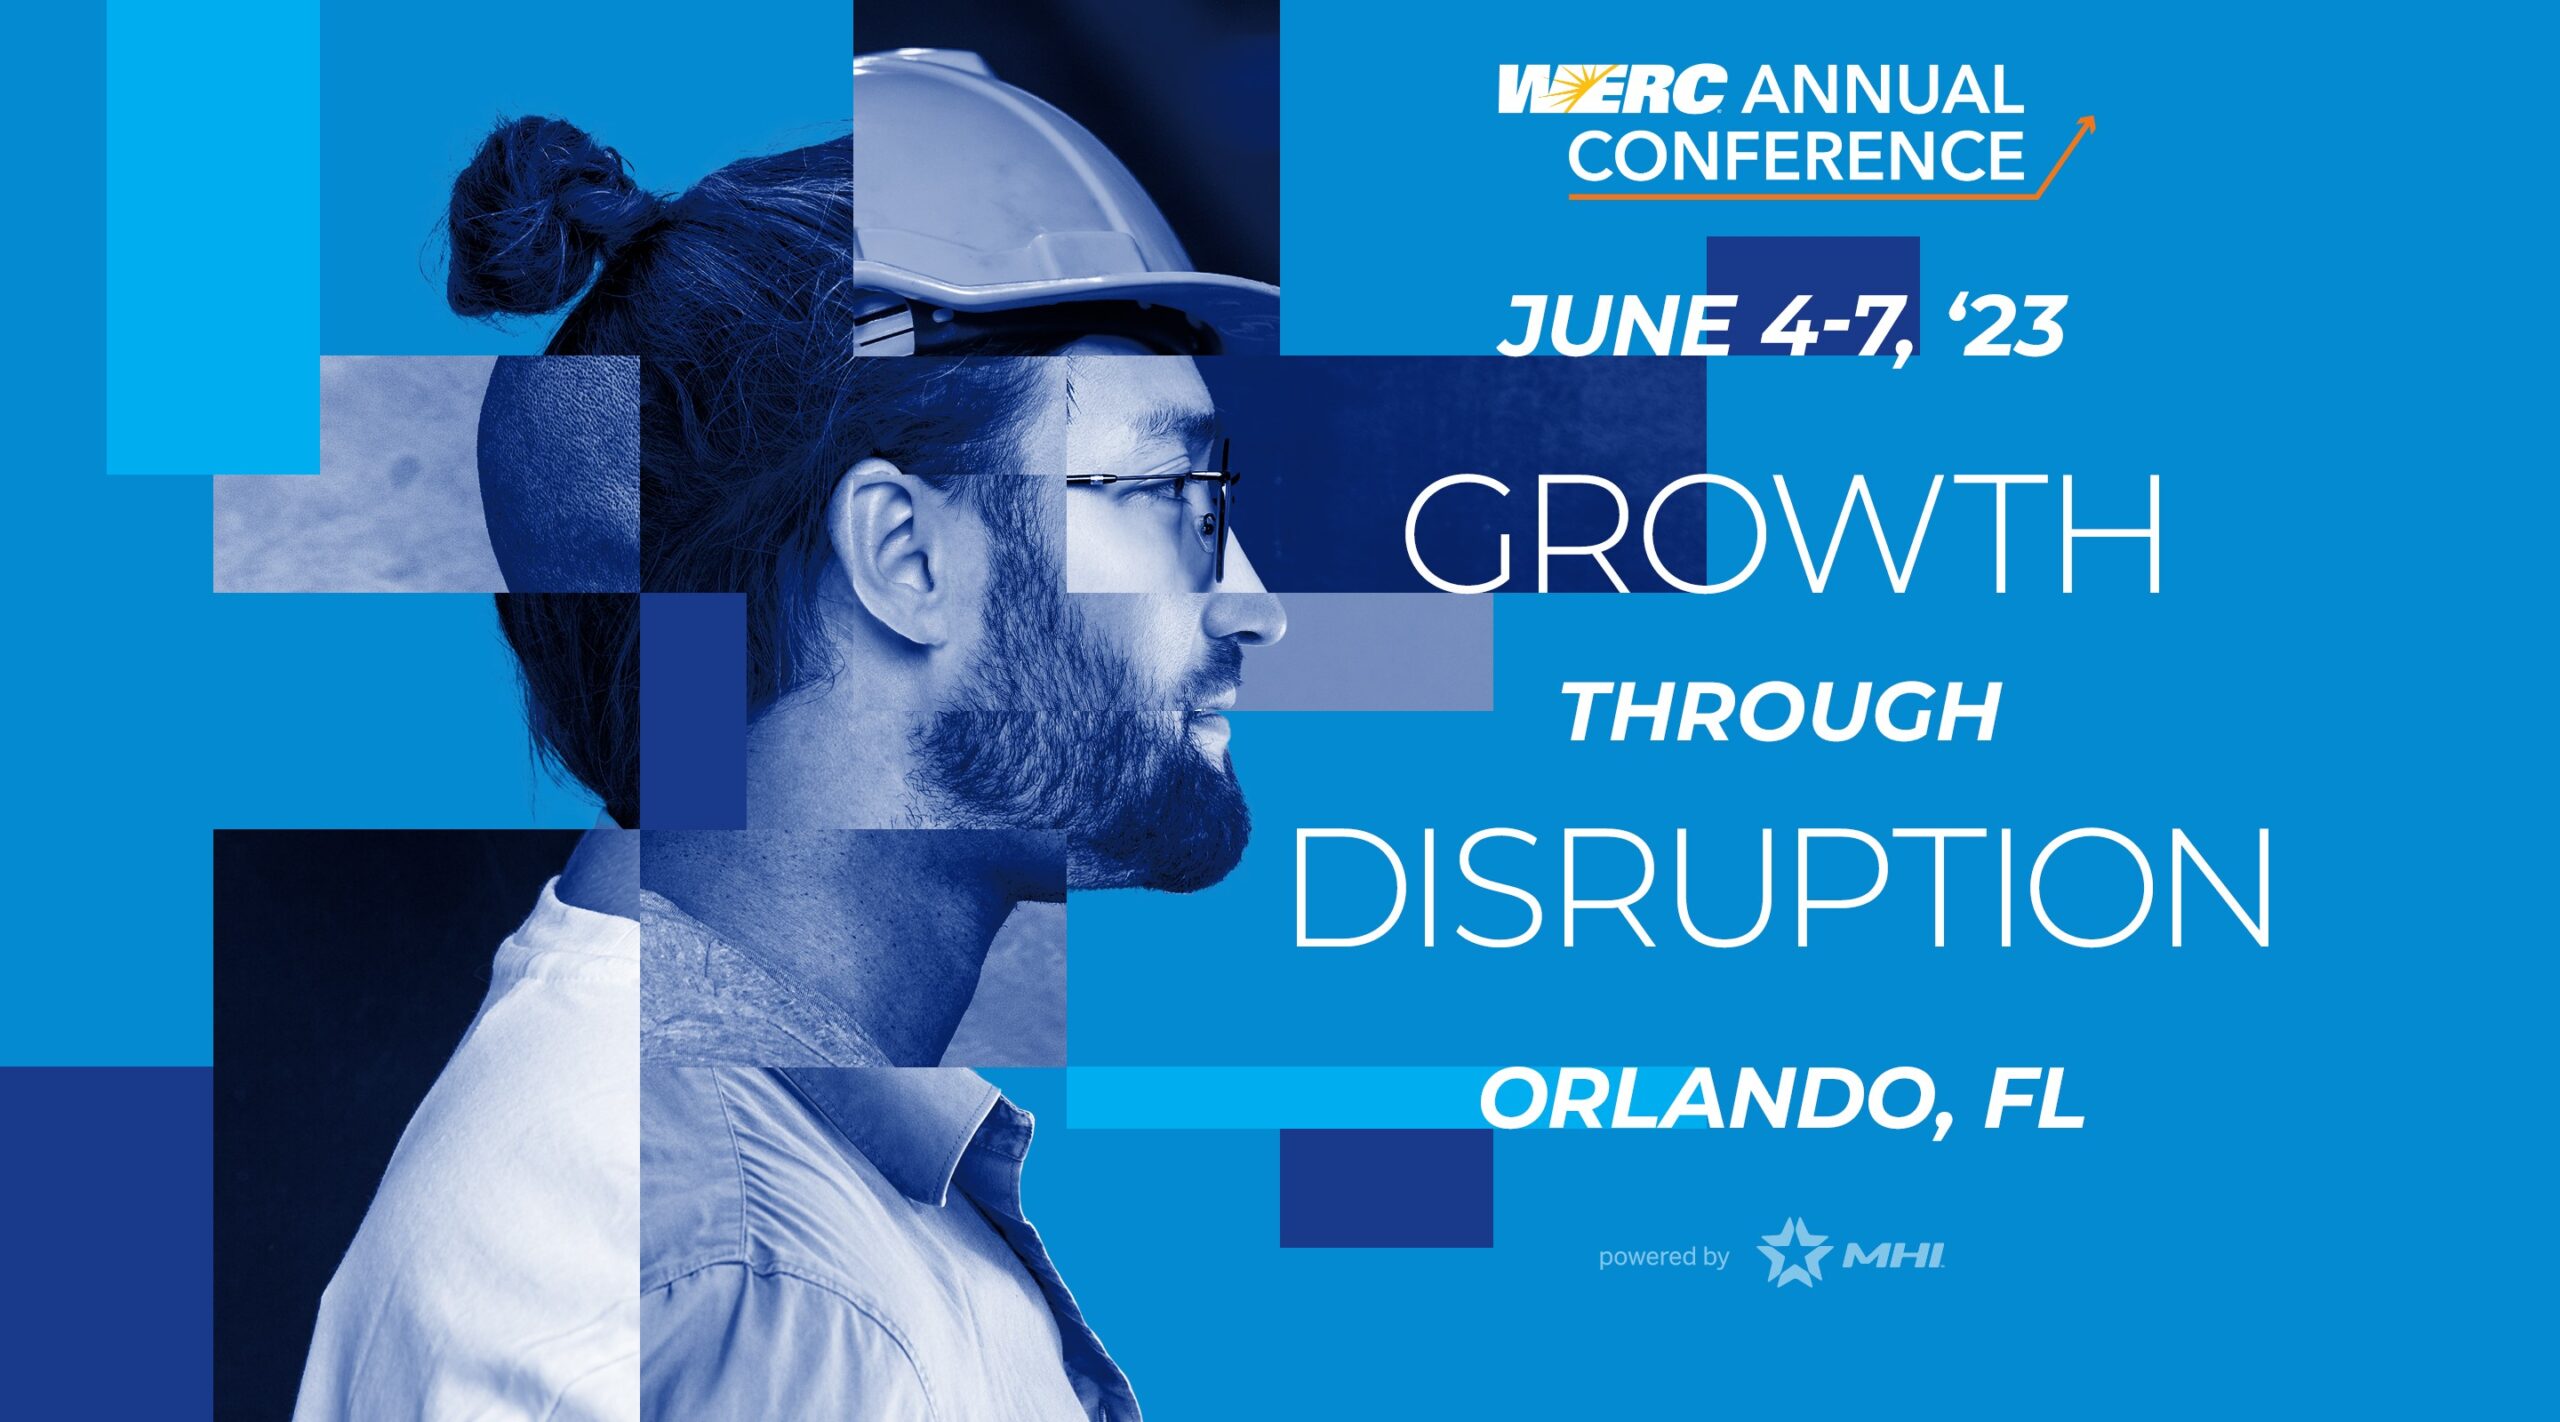 National Material Handling - WERC Annual Conference